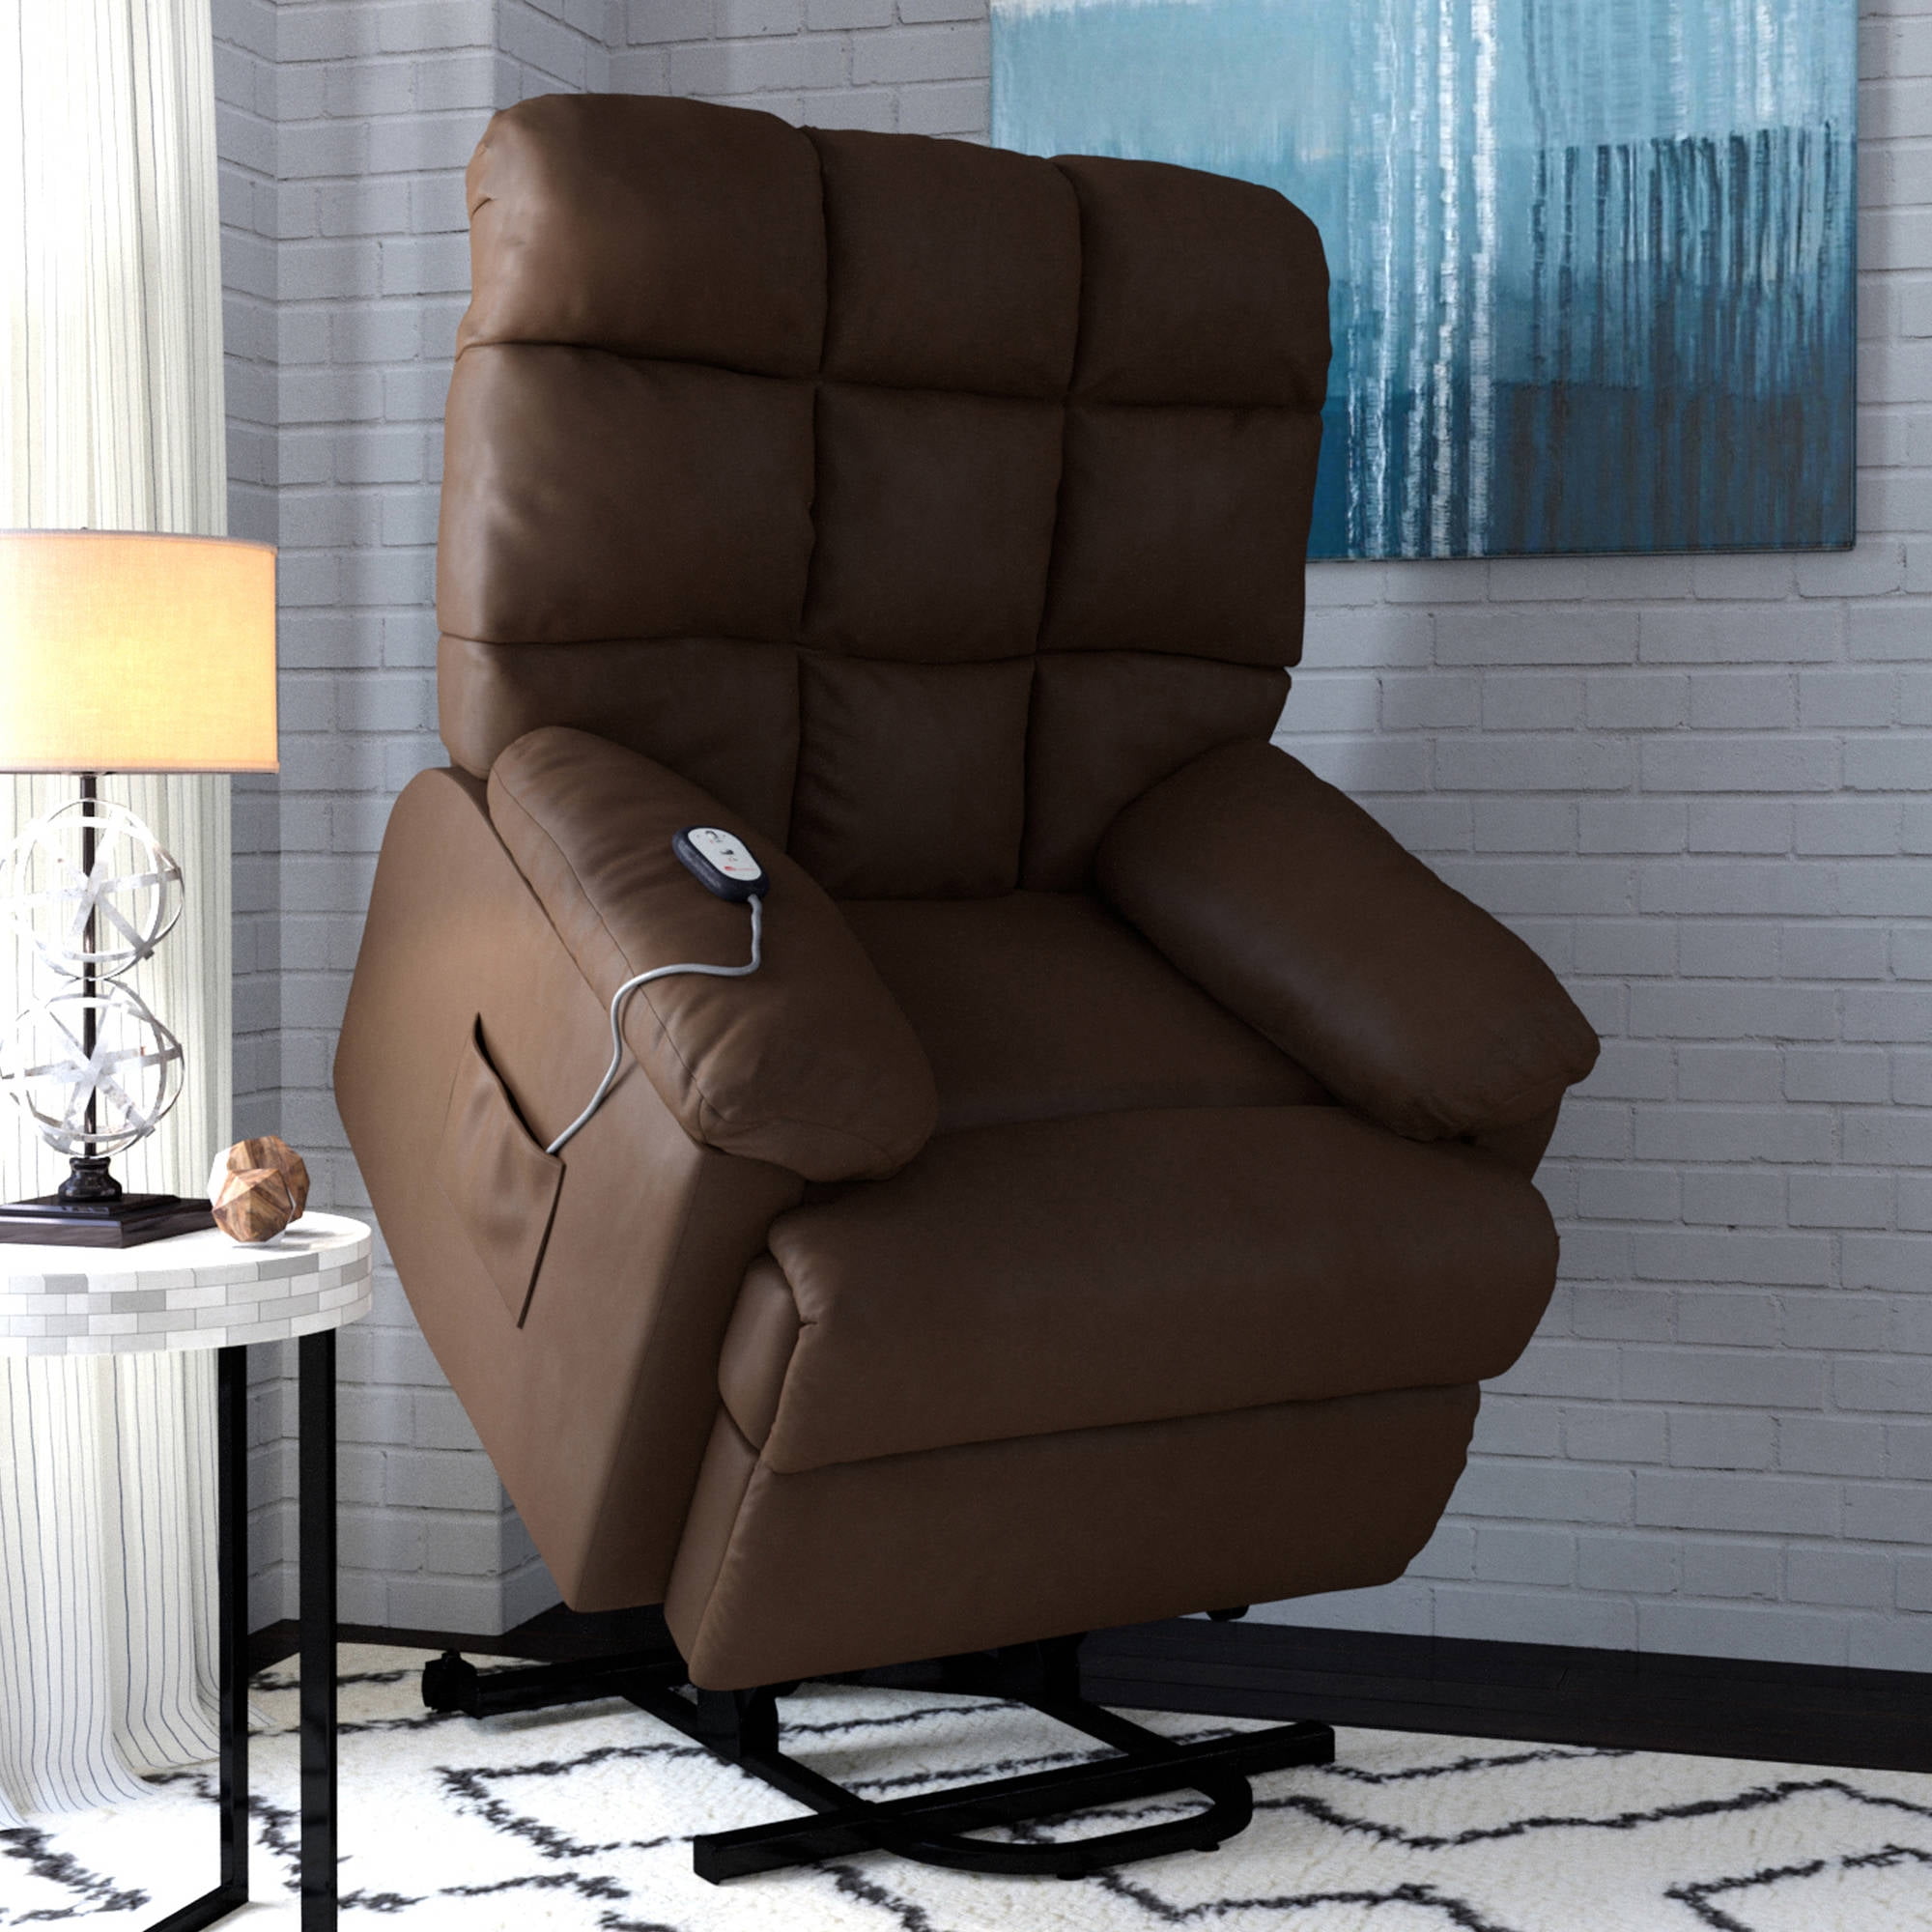 New Recliner Lift Chair Walmart for Large Space